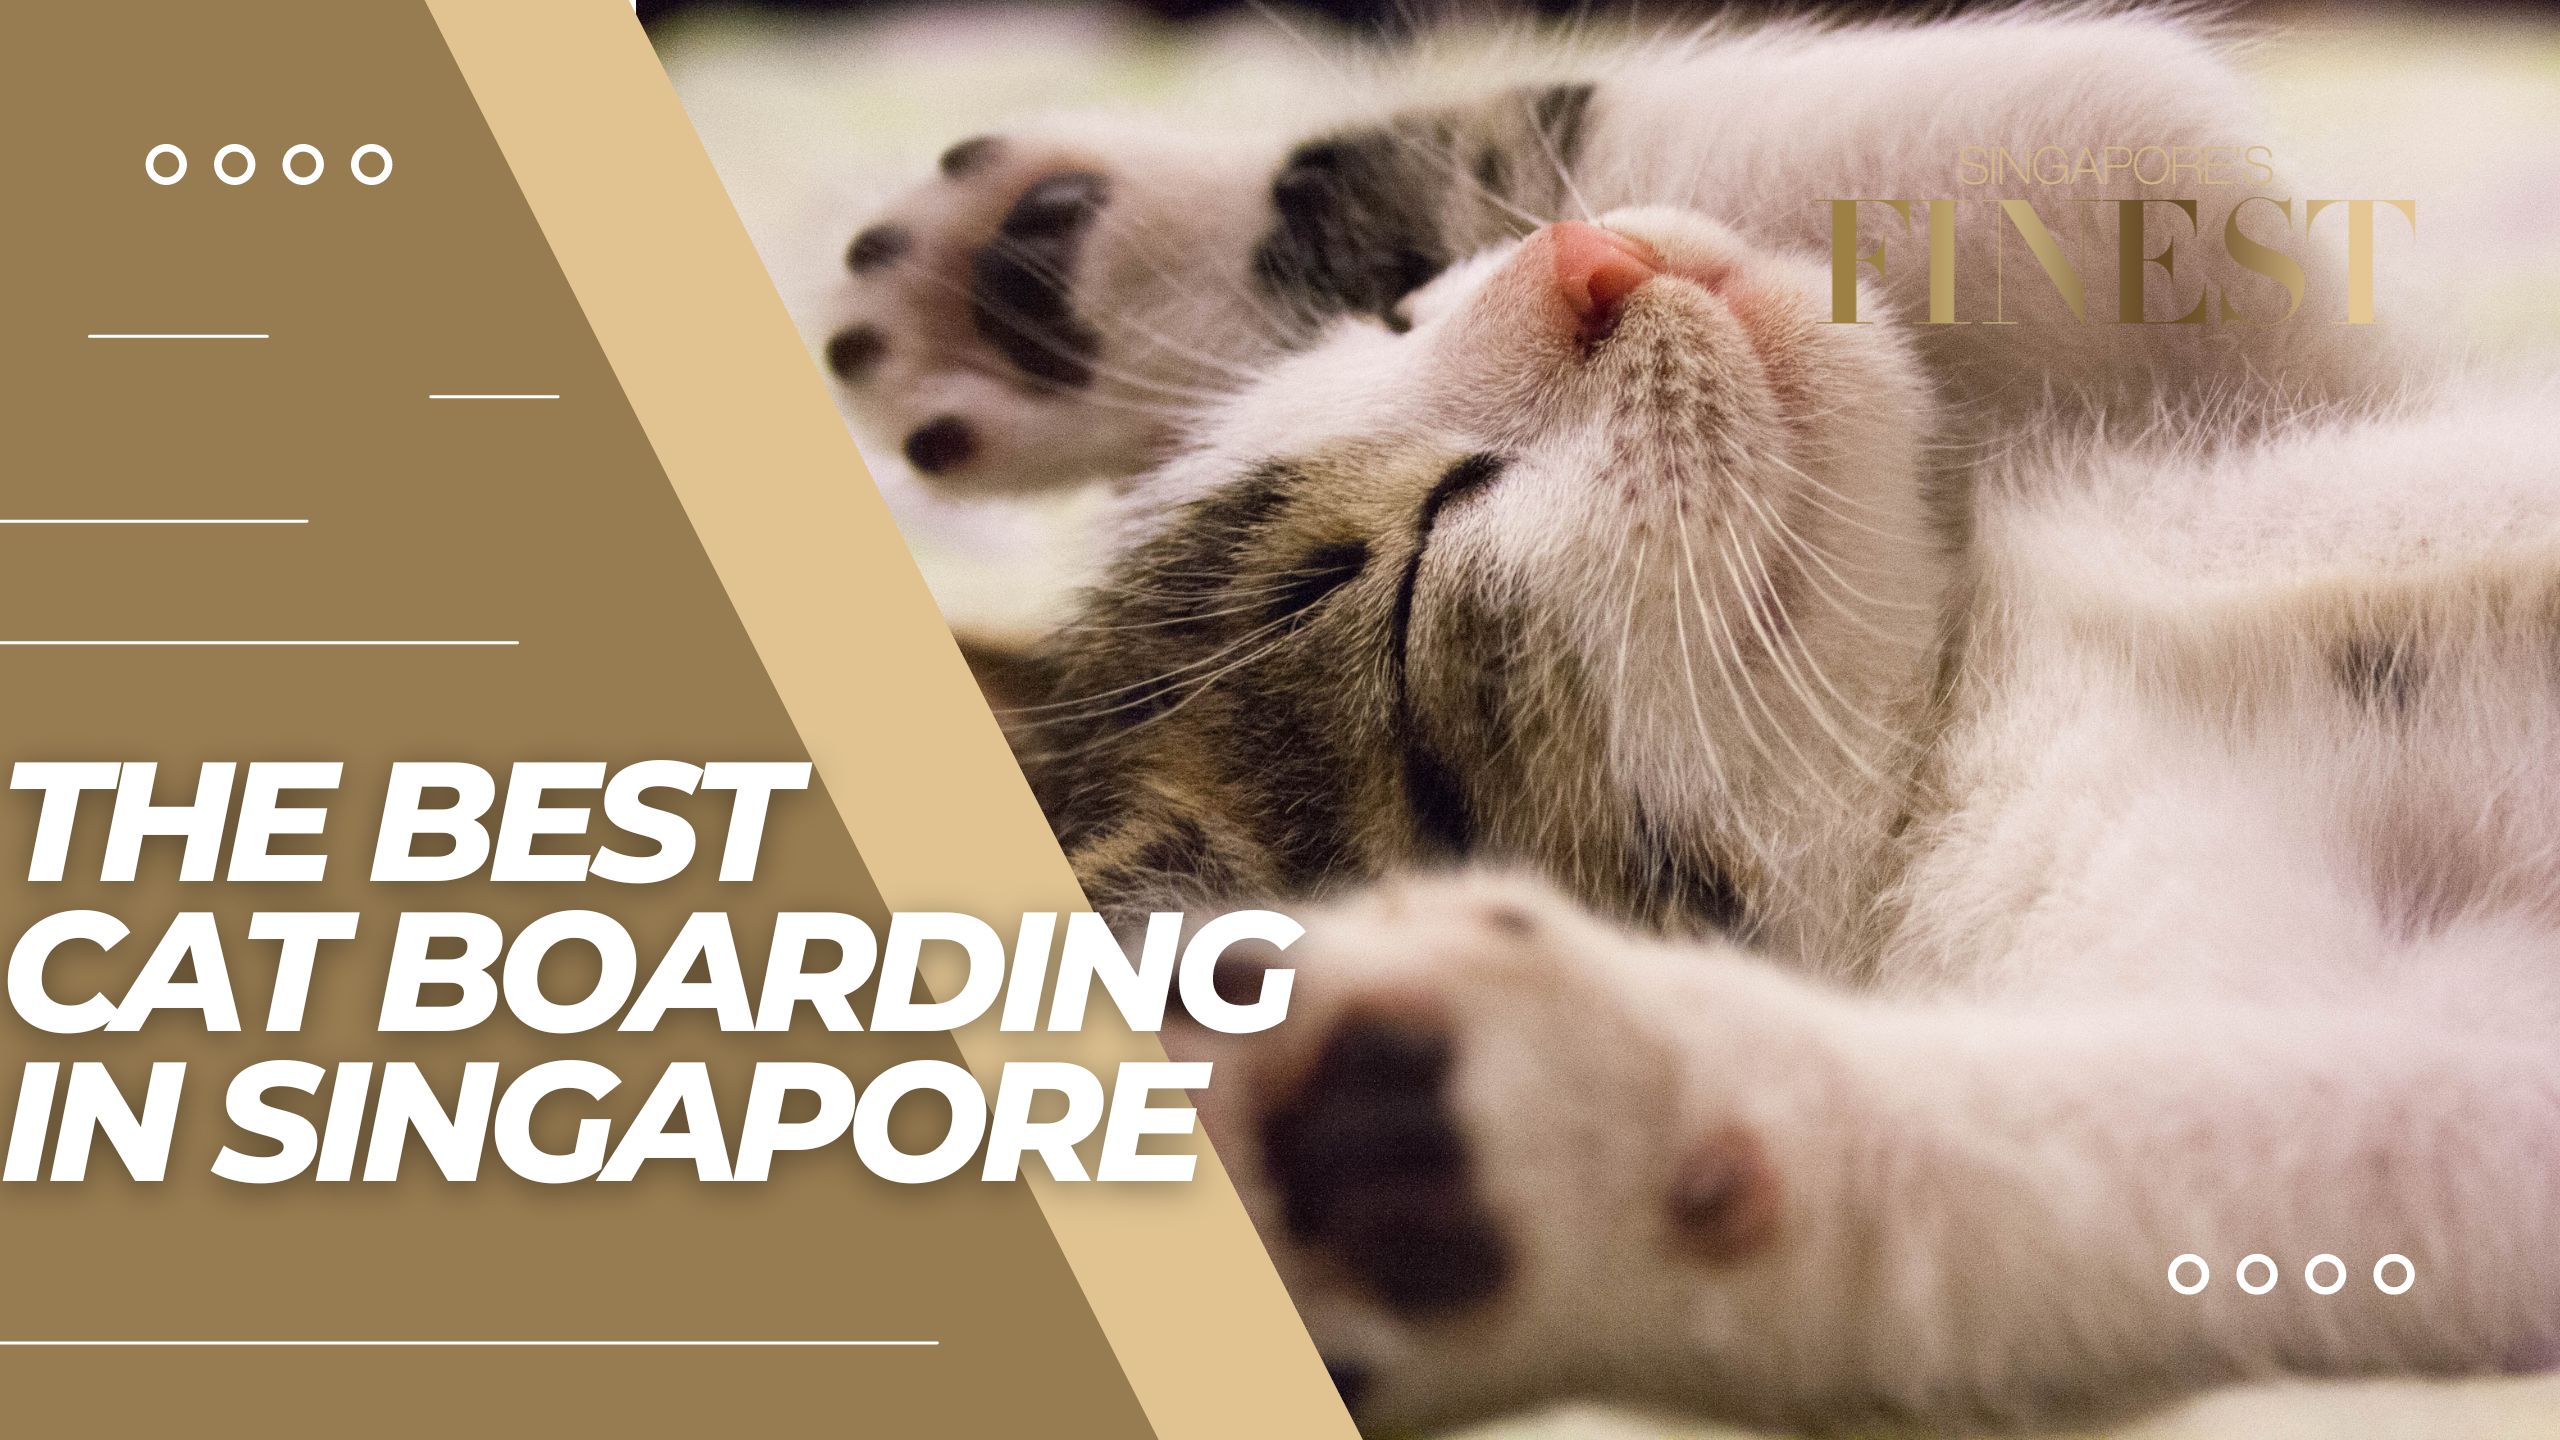 The Finest Cat Boarding in Singapore